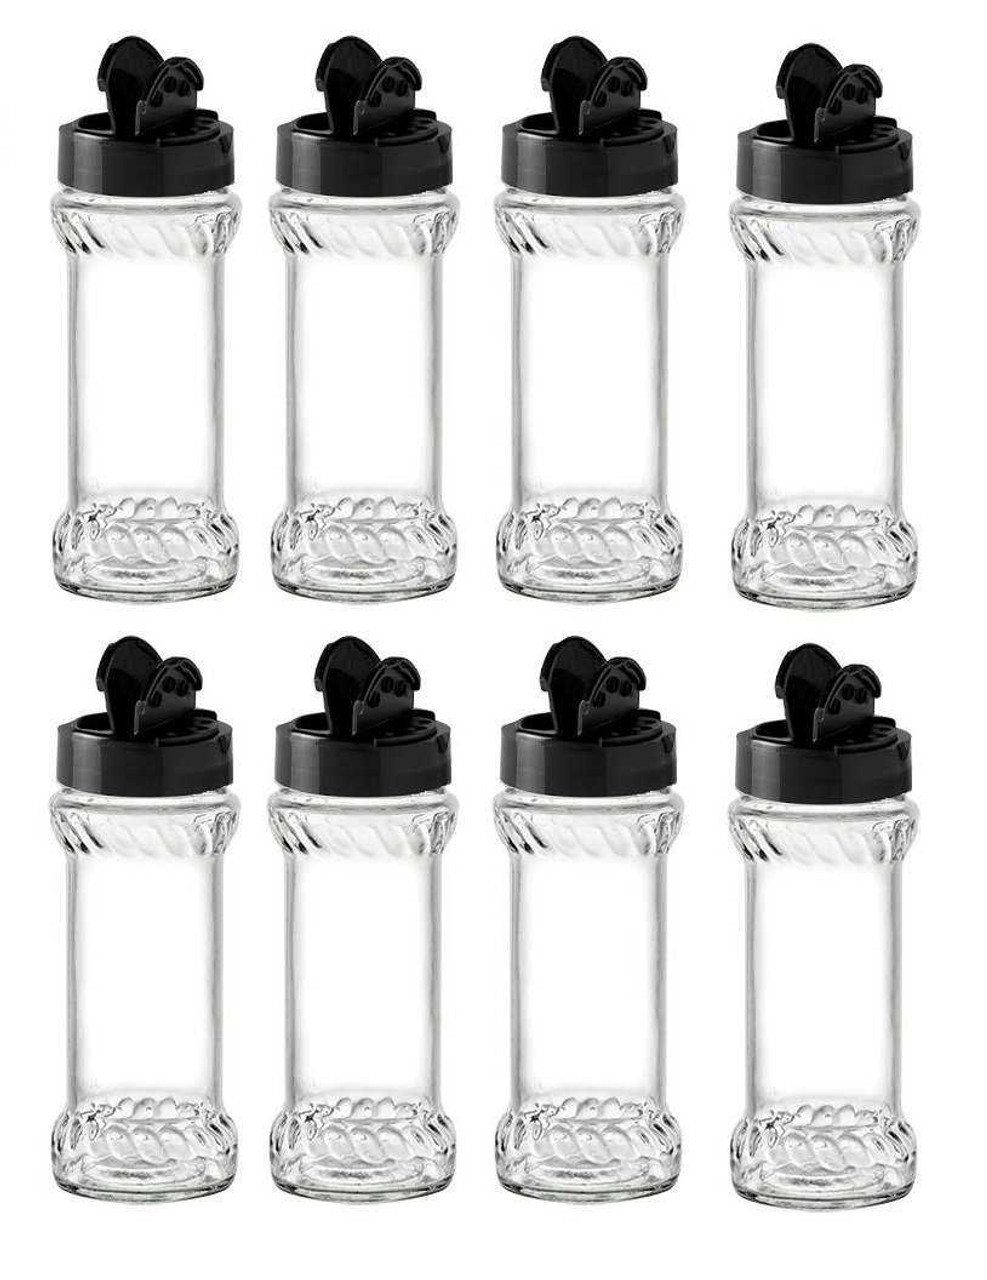 https://cdn11.bigcommerce.com/s-1ybtx/images/stencil/1280x1280/products/846/6053/Set-of-8-64-oz-Glass-Spice-Jars-with-Shaker-Fitment-and-Black-Caps_2623__49725.1699988410.jpg?c=2?imbypass=on